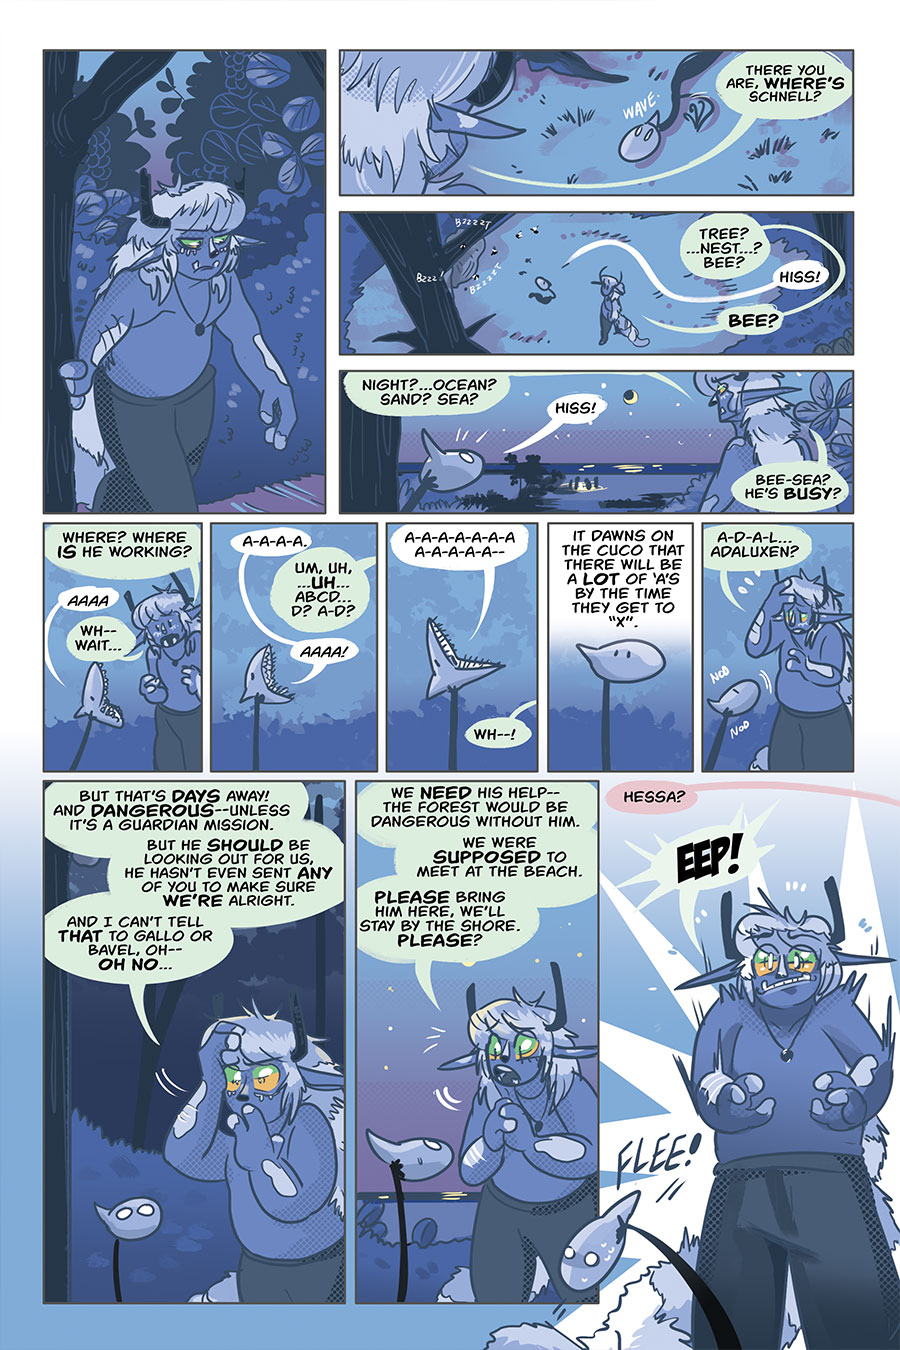 Gone Fishing 006, page 5